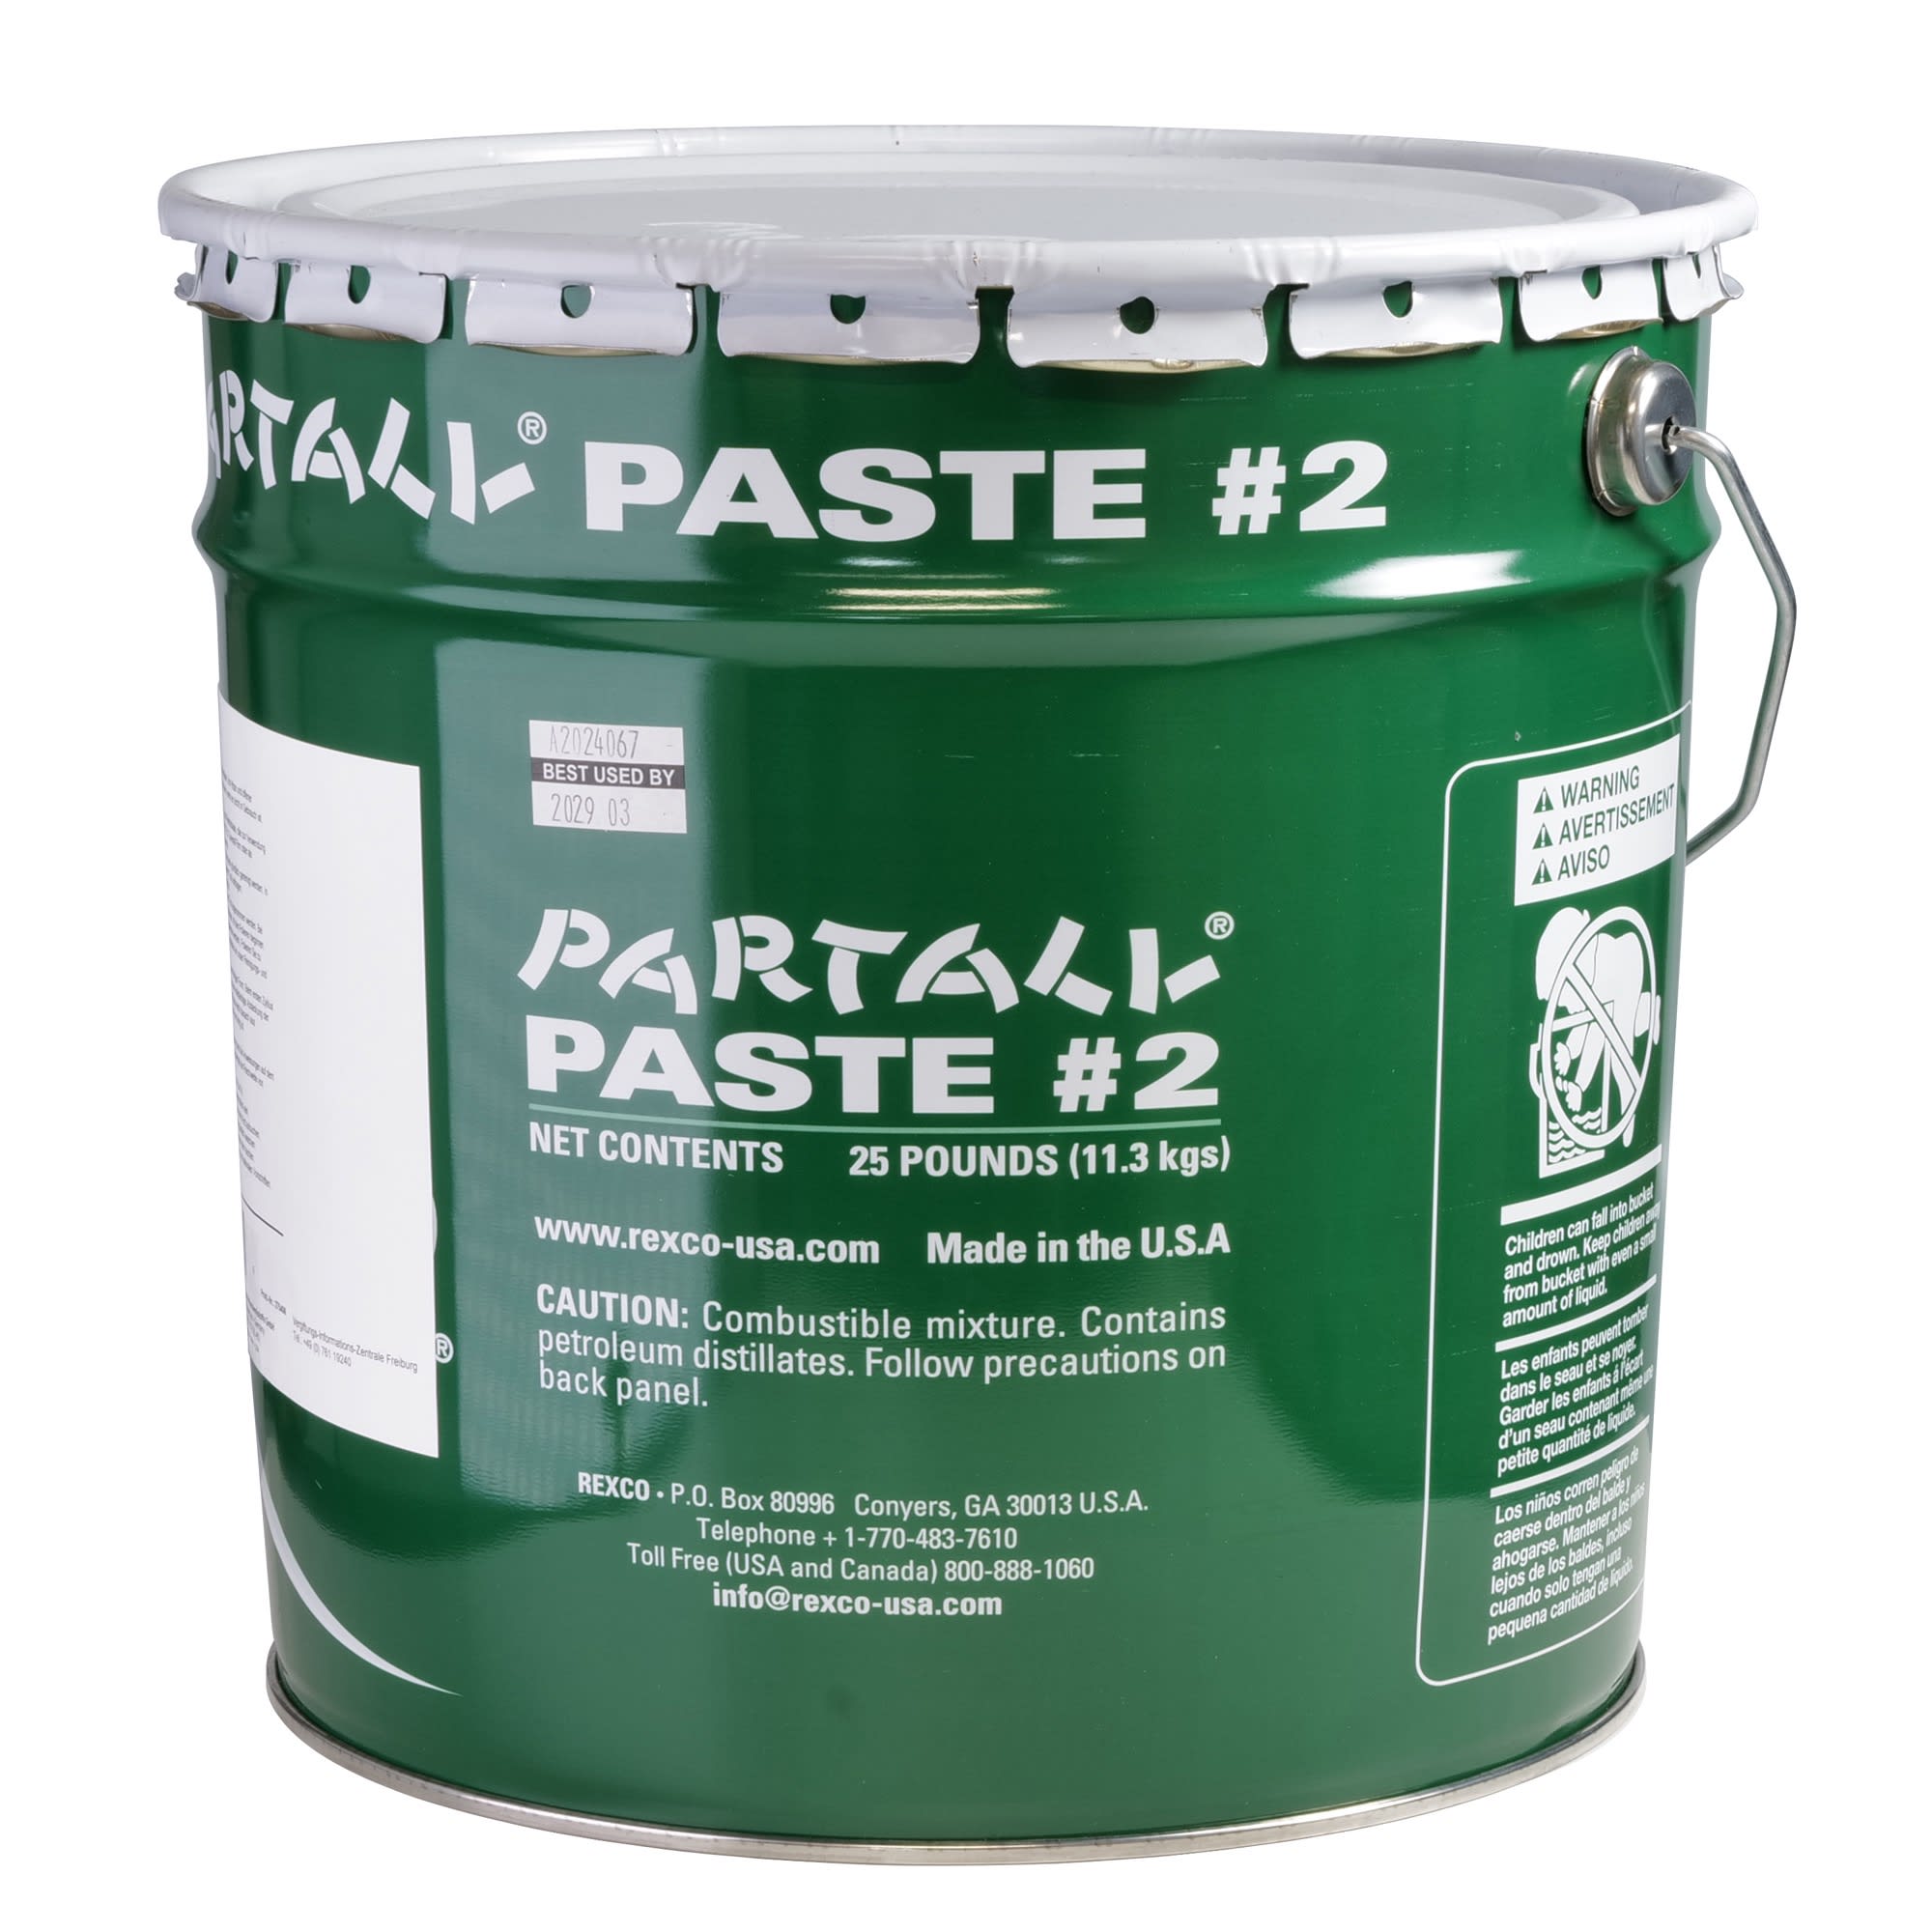 PARTALL® Paste #2 (green), image 4